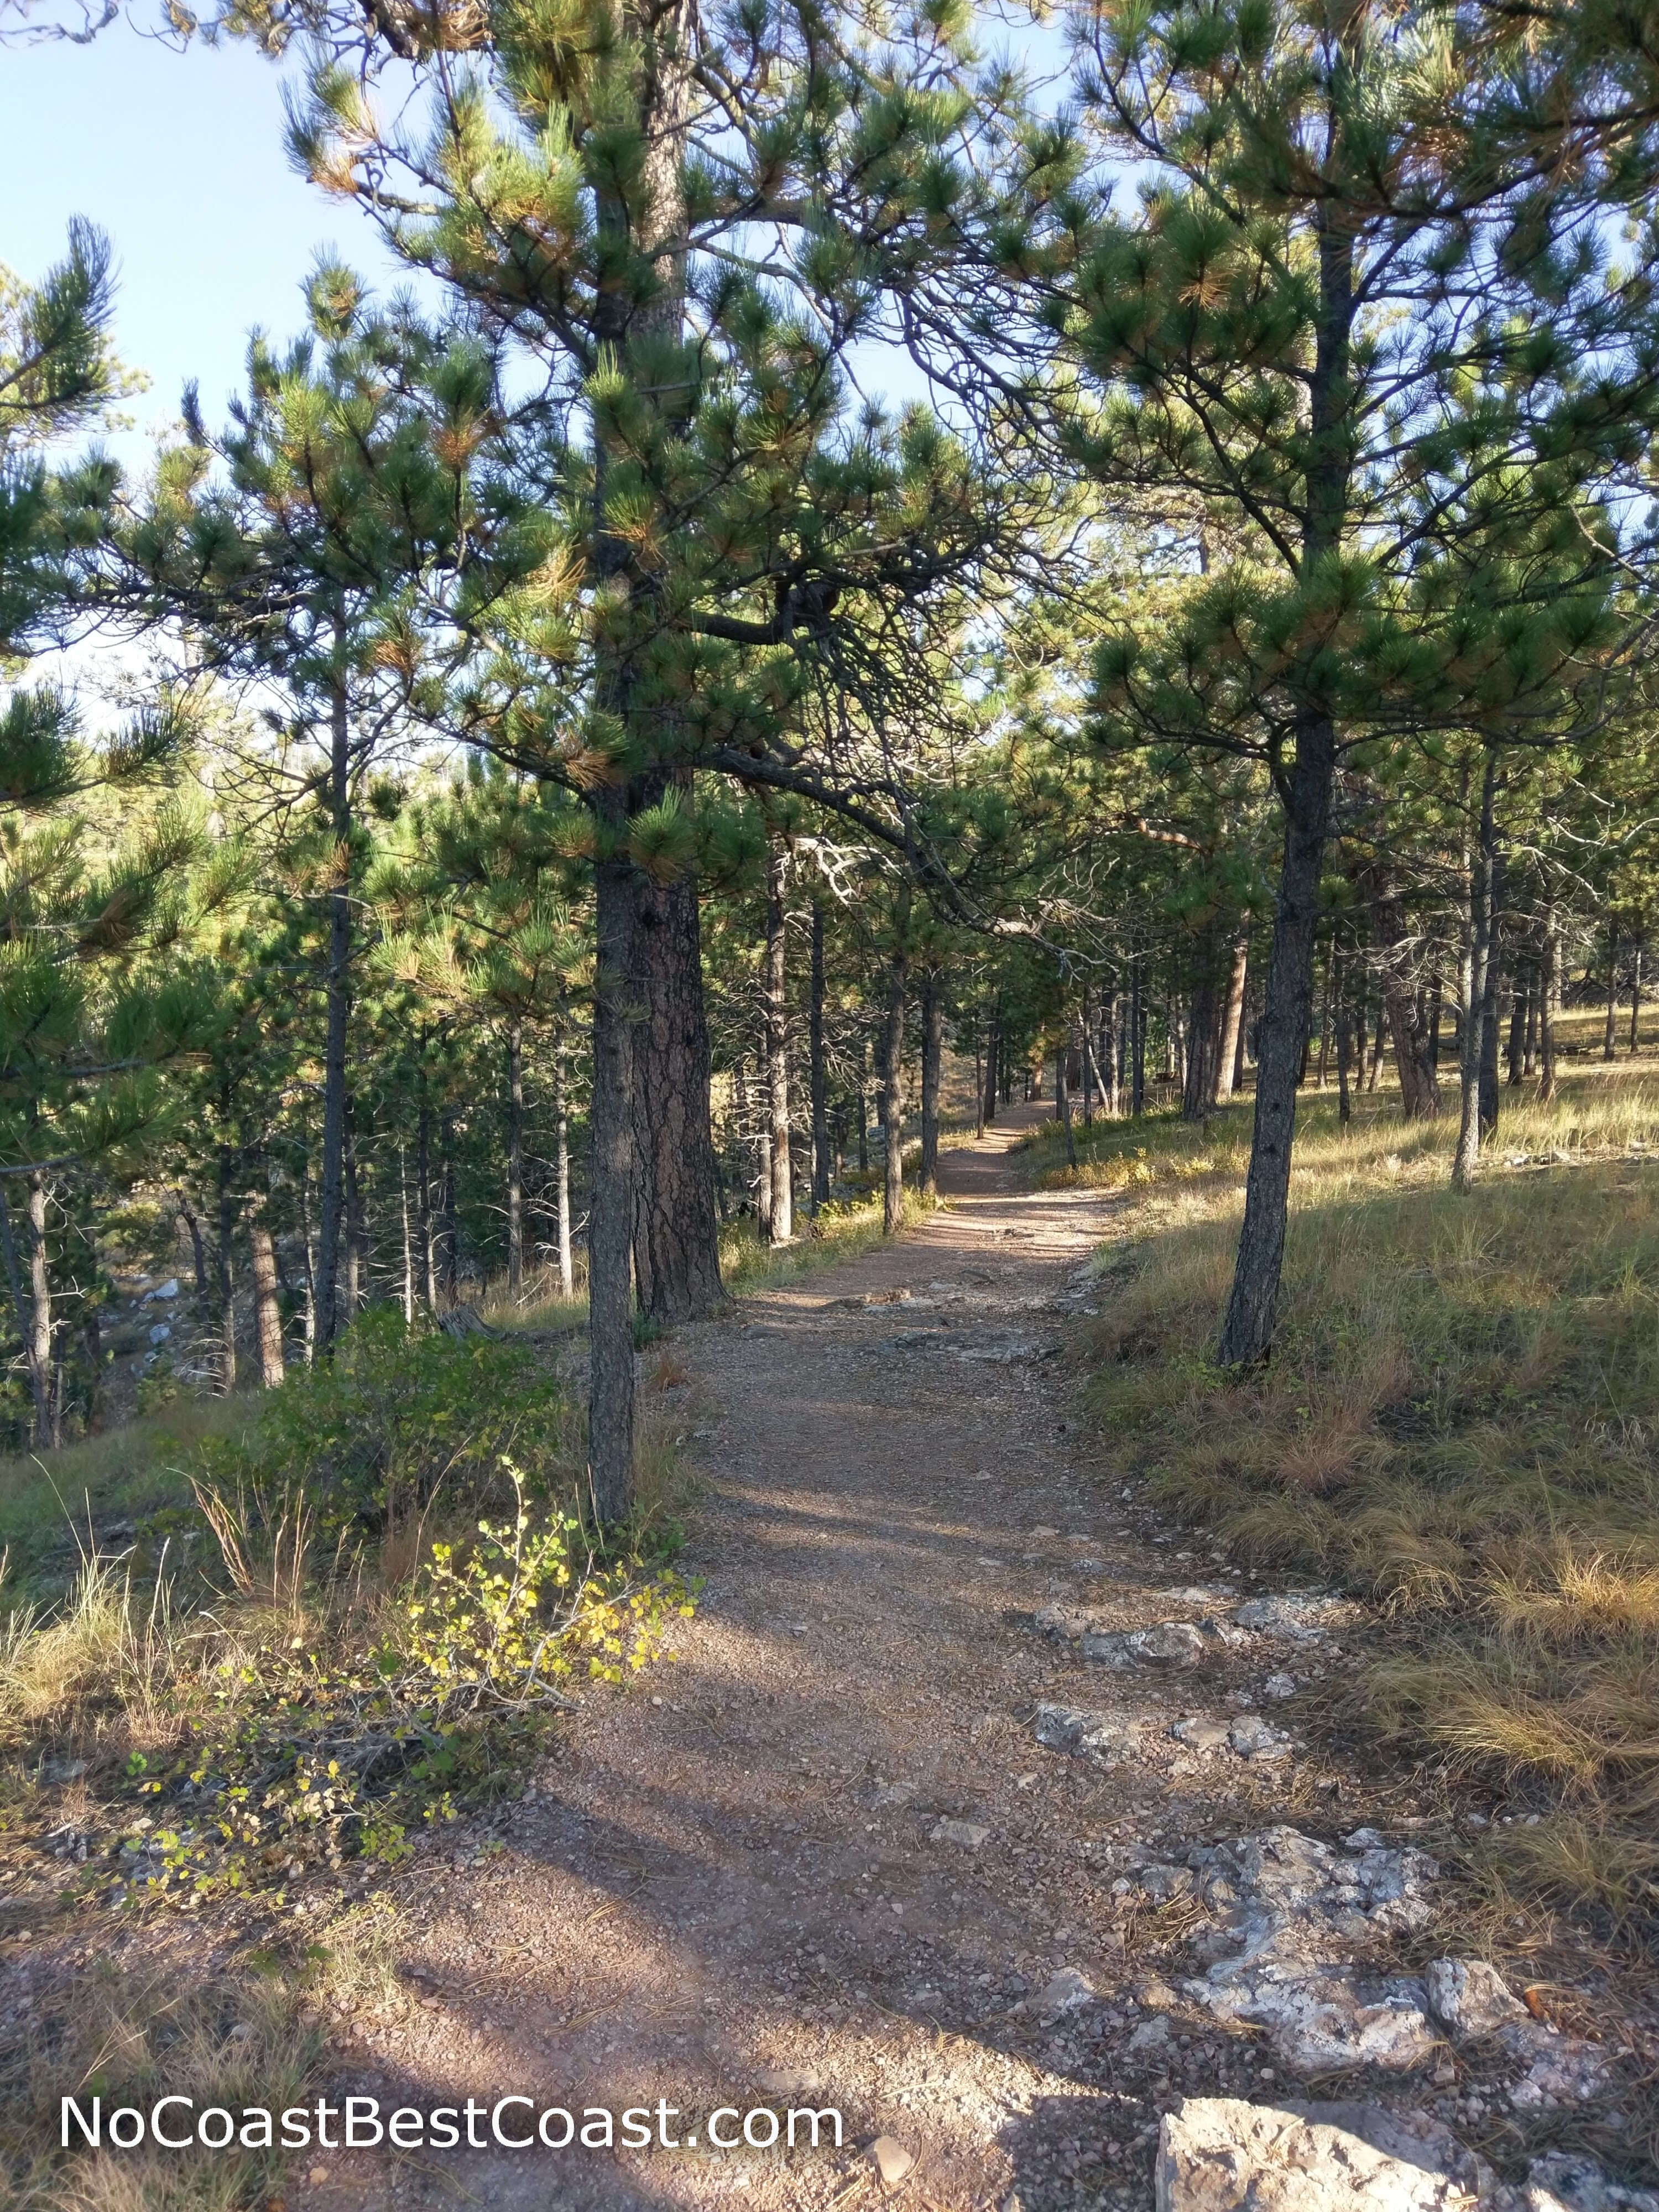 The trail traveling through pine forest